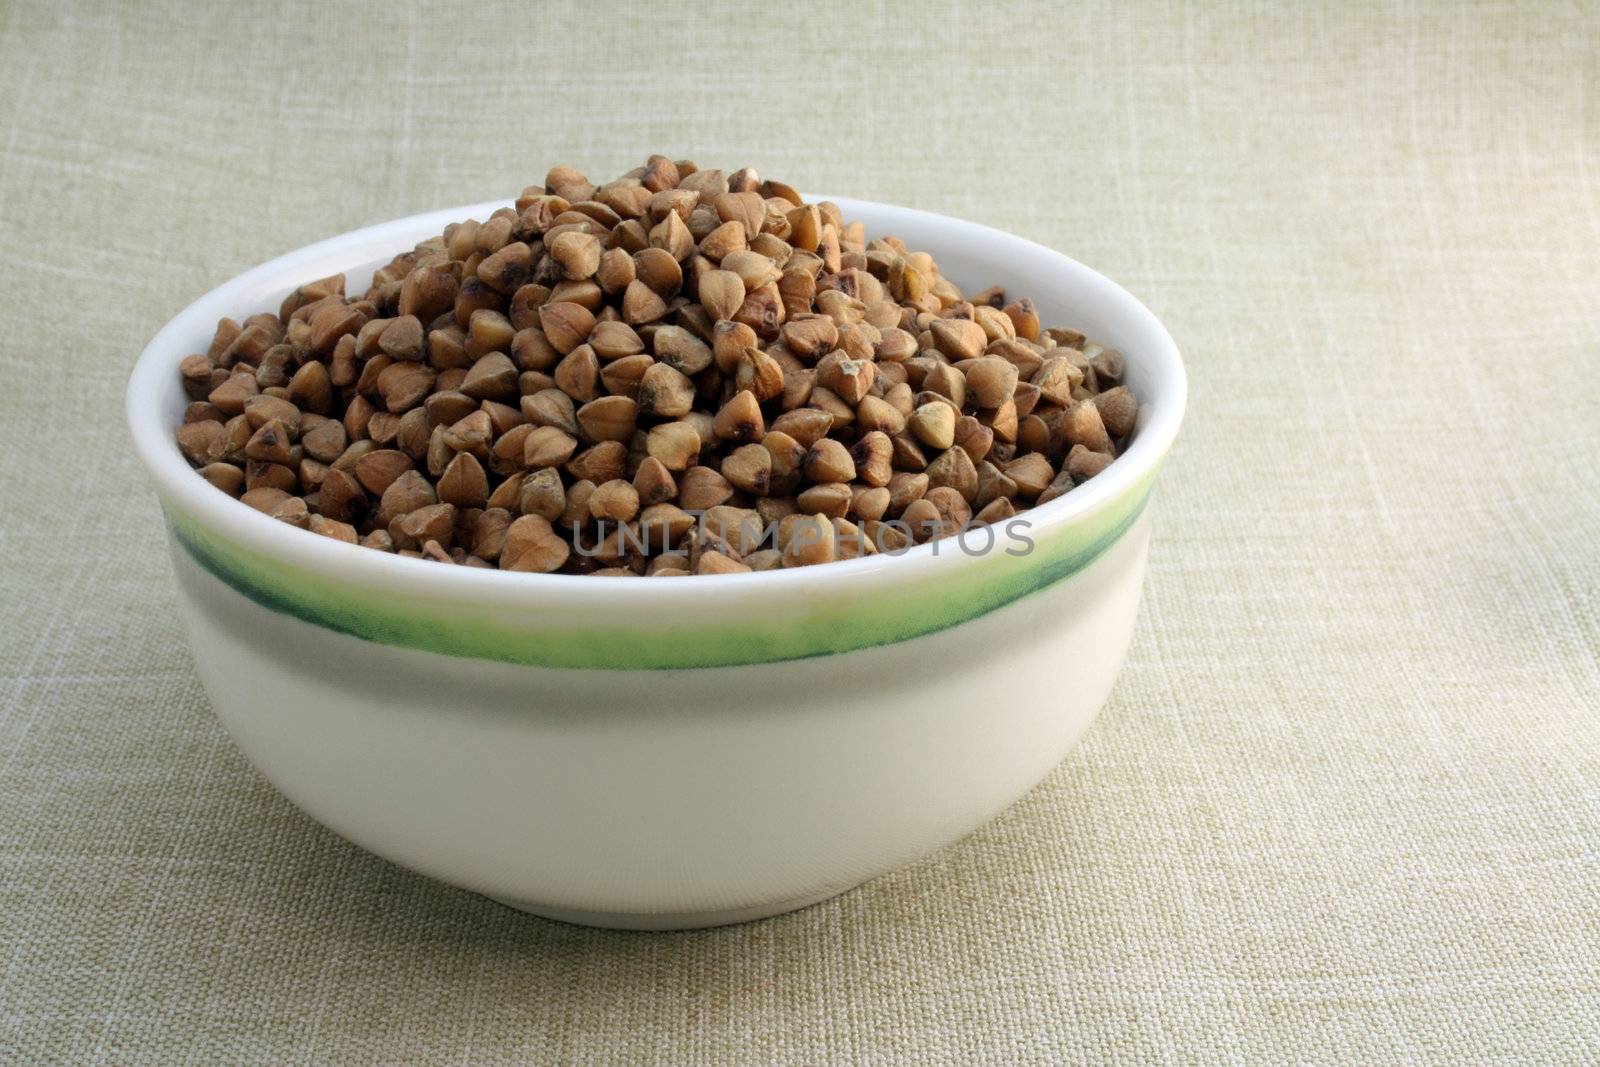 Some buckwheat in small bowl on linen background